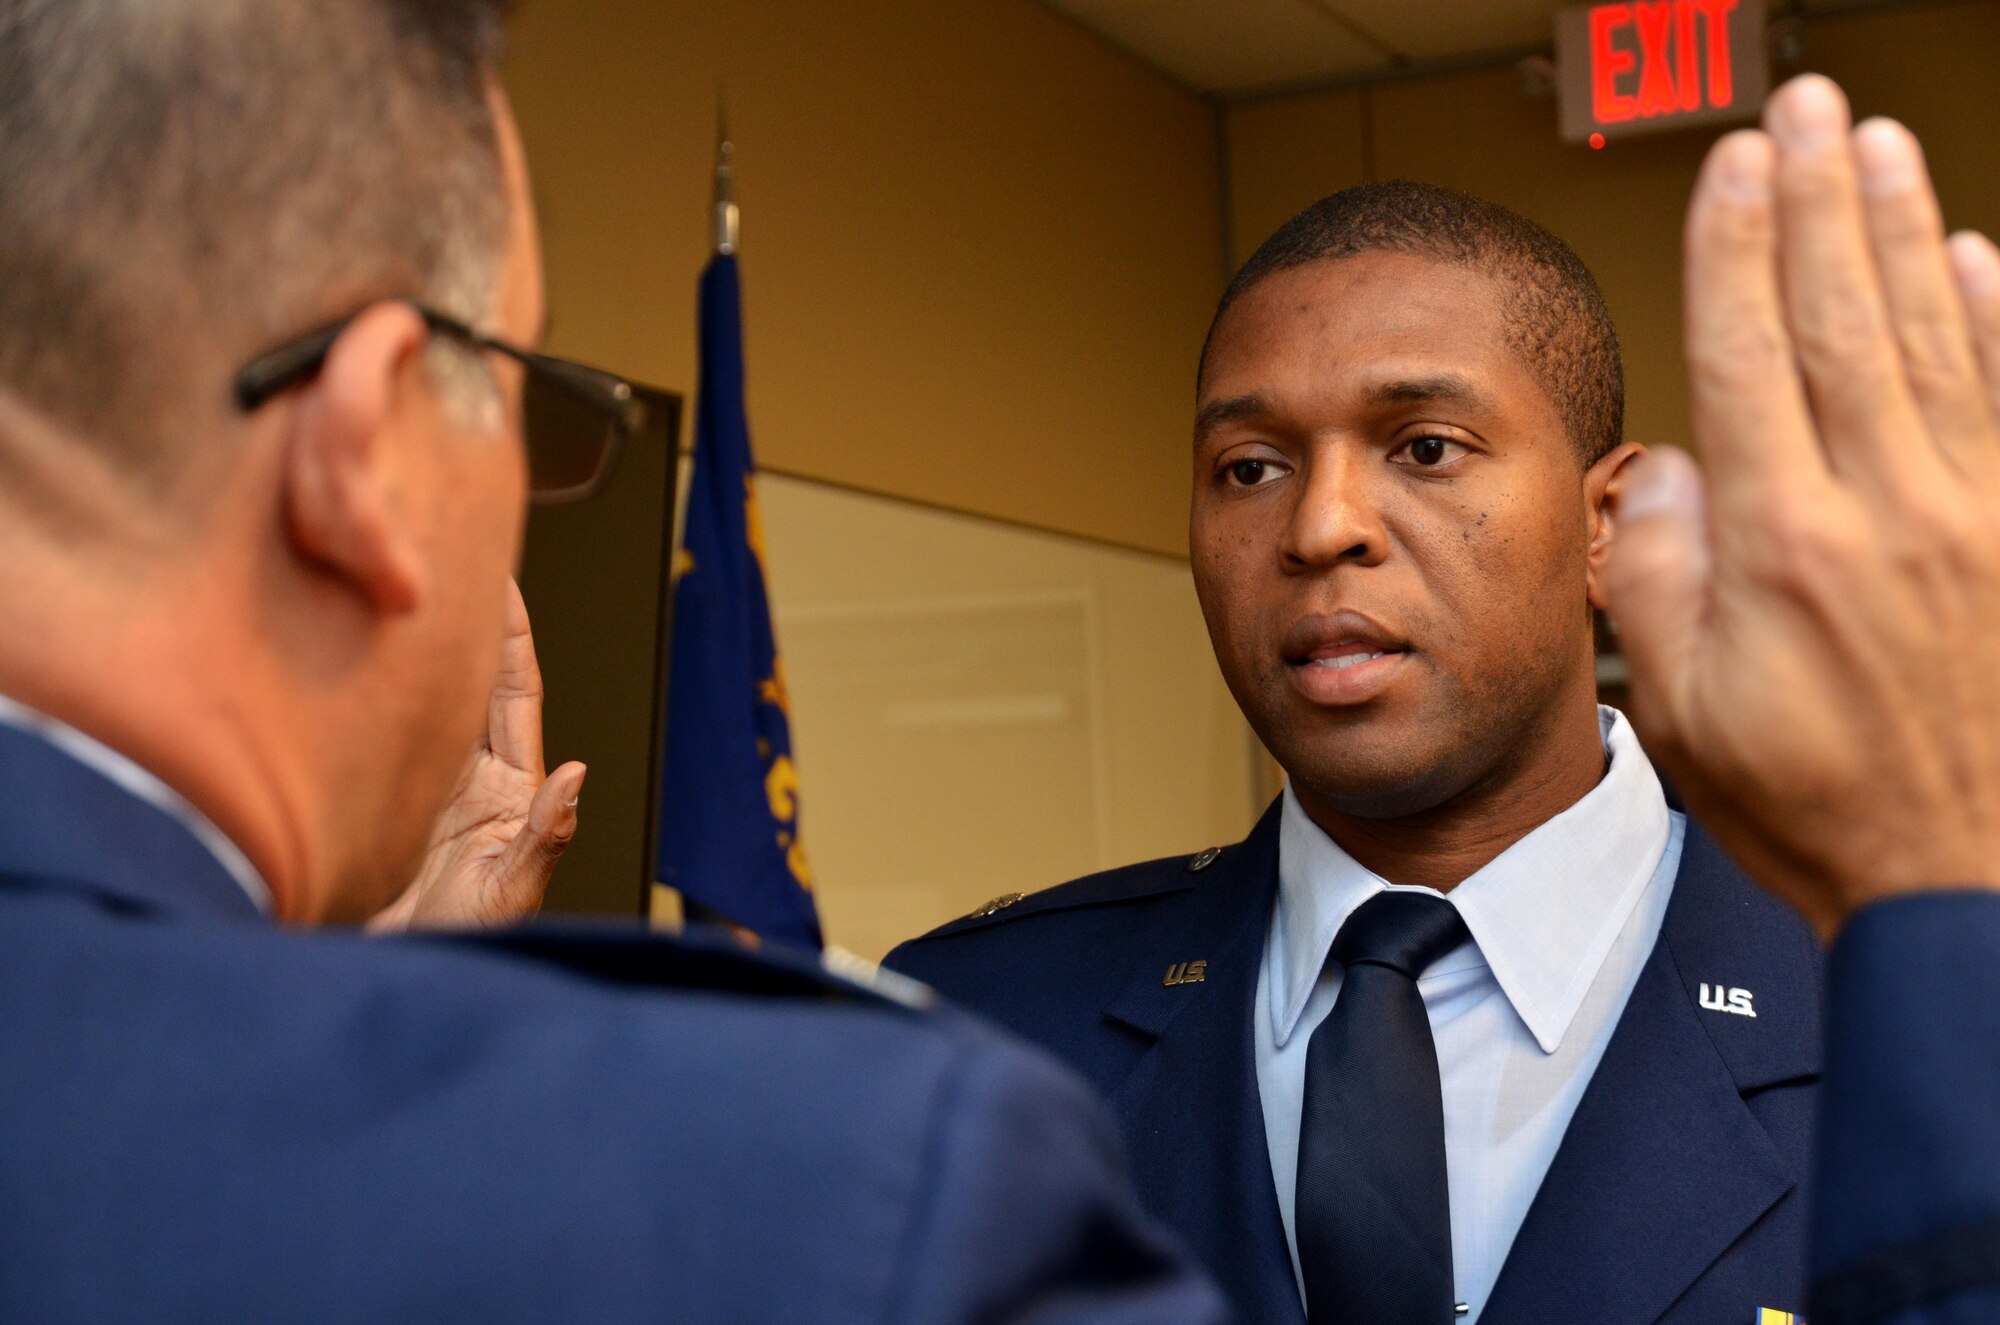 Newly promoted Lt. Col. Andre Wright, 94th Civil Engineer Squadron, is sworn in during his ceremony of promotion at Dobbins Air Reserve Base on October 15, 2016. Col. Marty Hughes, 94th Mission Support Group commander, was the presiding officer. (U.S. Air Force photo by Senior Airman Lauren Douglas)